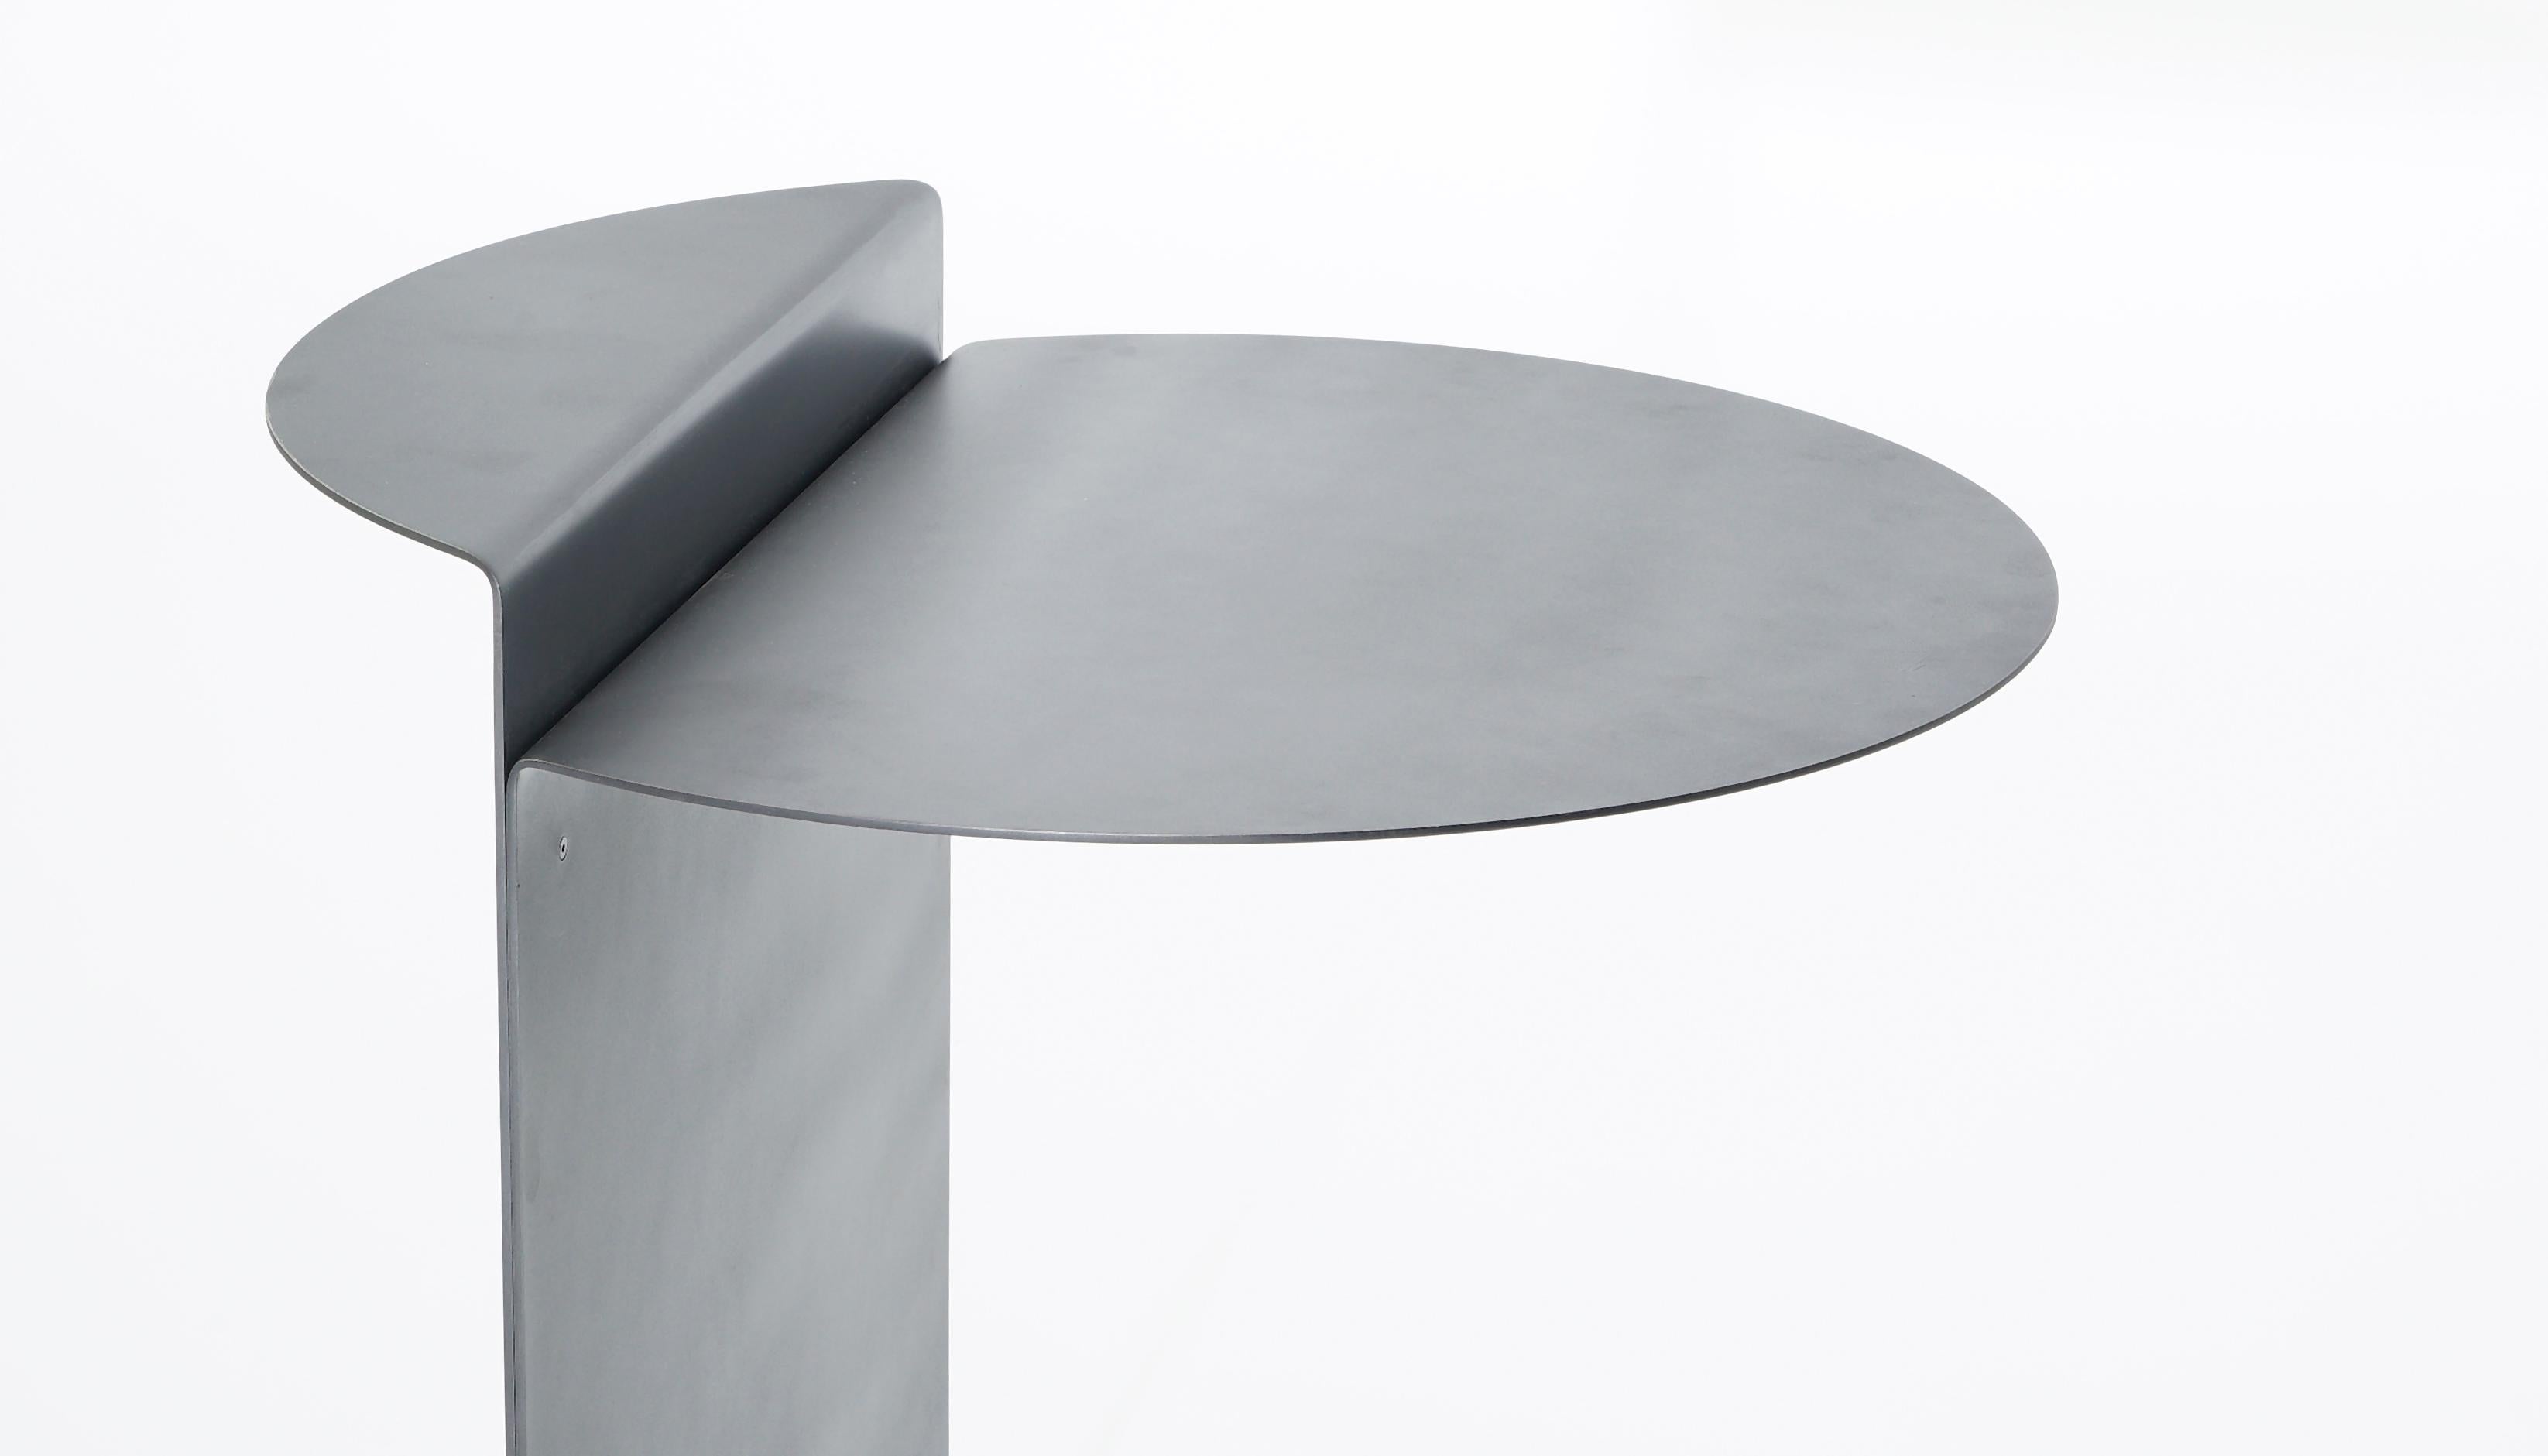 American O Table in Blackened Stainless Steel by Estudio Persona